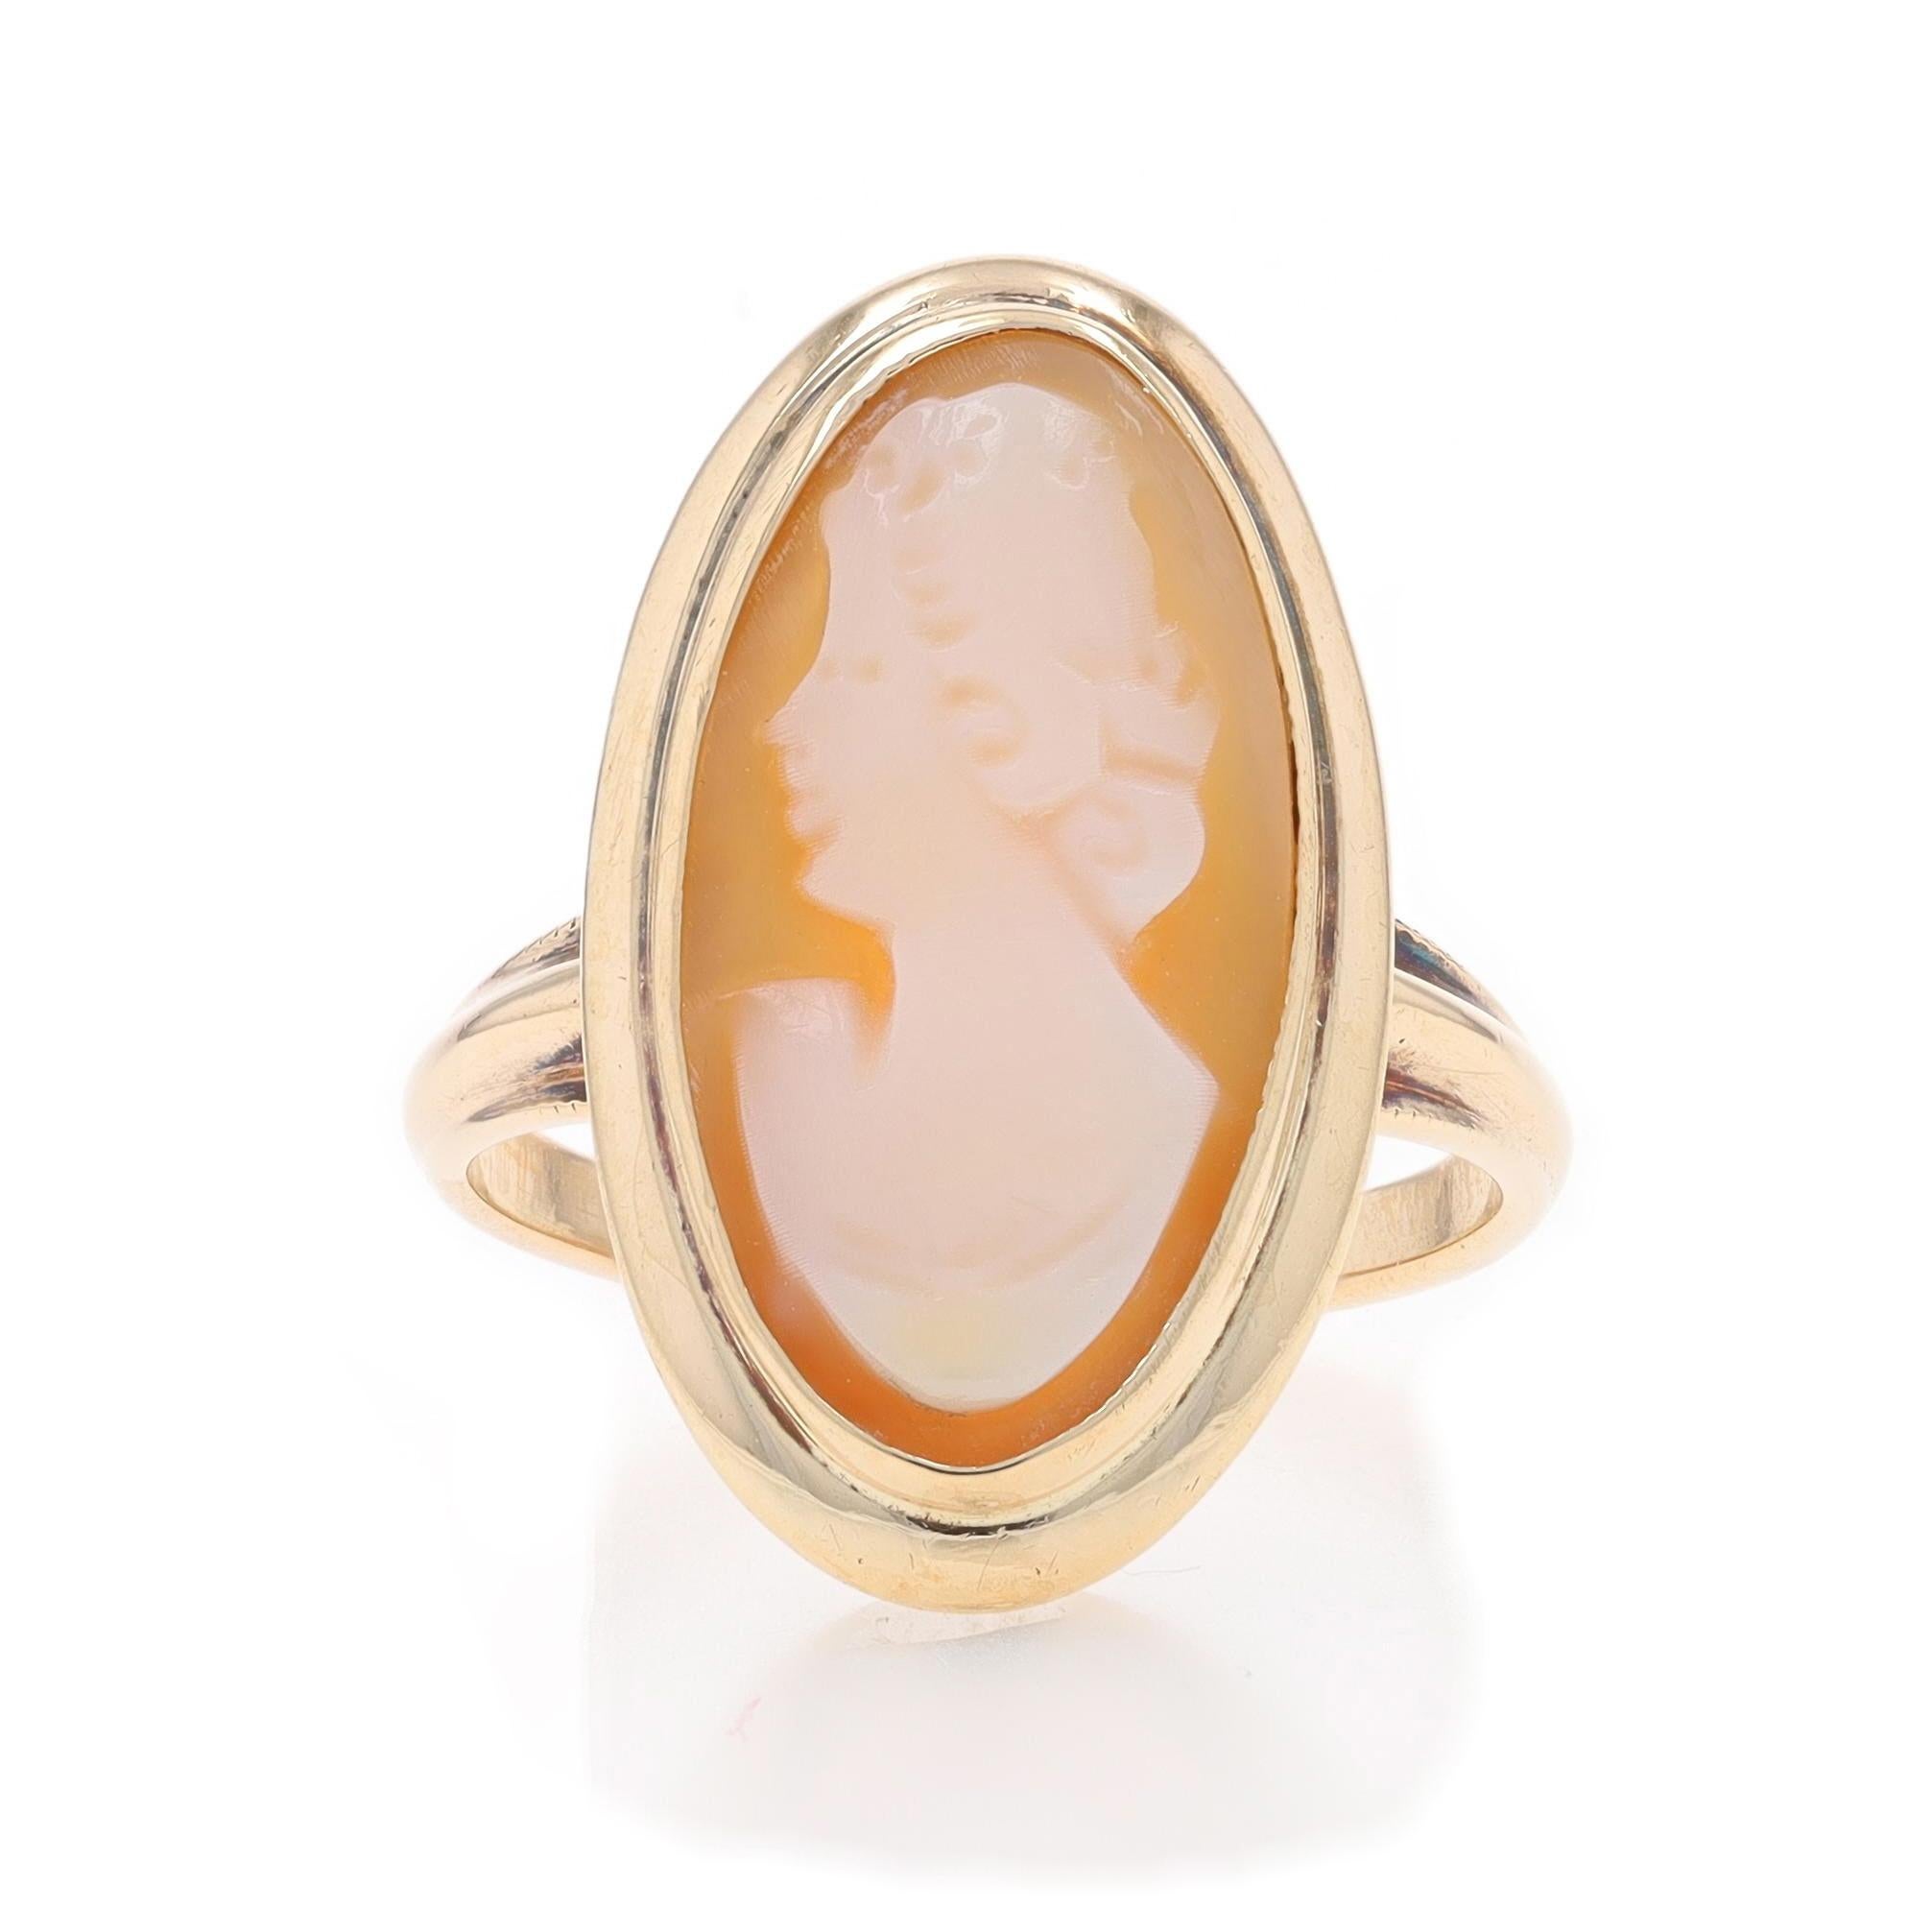 Size: 4 1/4
Sizing Fee: Up 3 sizes for $30 or Down 1 1/2 sizes for $30

Era: Vintage

Metal Content: 10k Yellow Gold

Stone Information

Natural Shell
Cut: Carved Cameo
Size: (approximately) 17.7mm x 9.3mm

Style: Cocktail Solitaire
Theme: